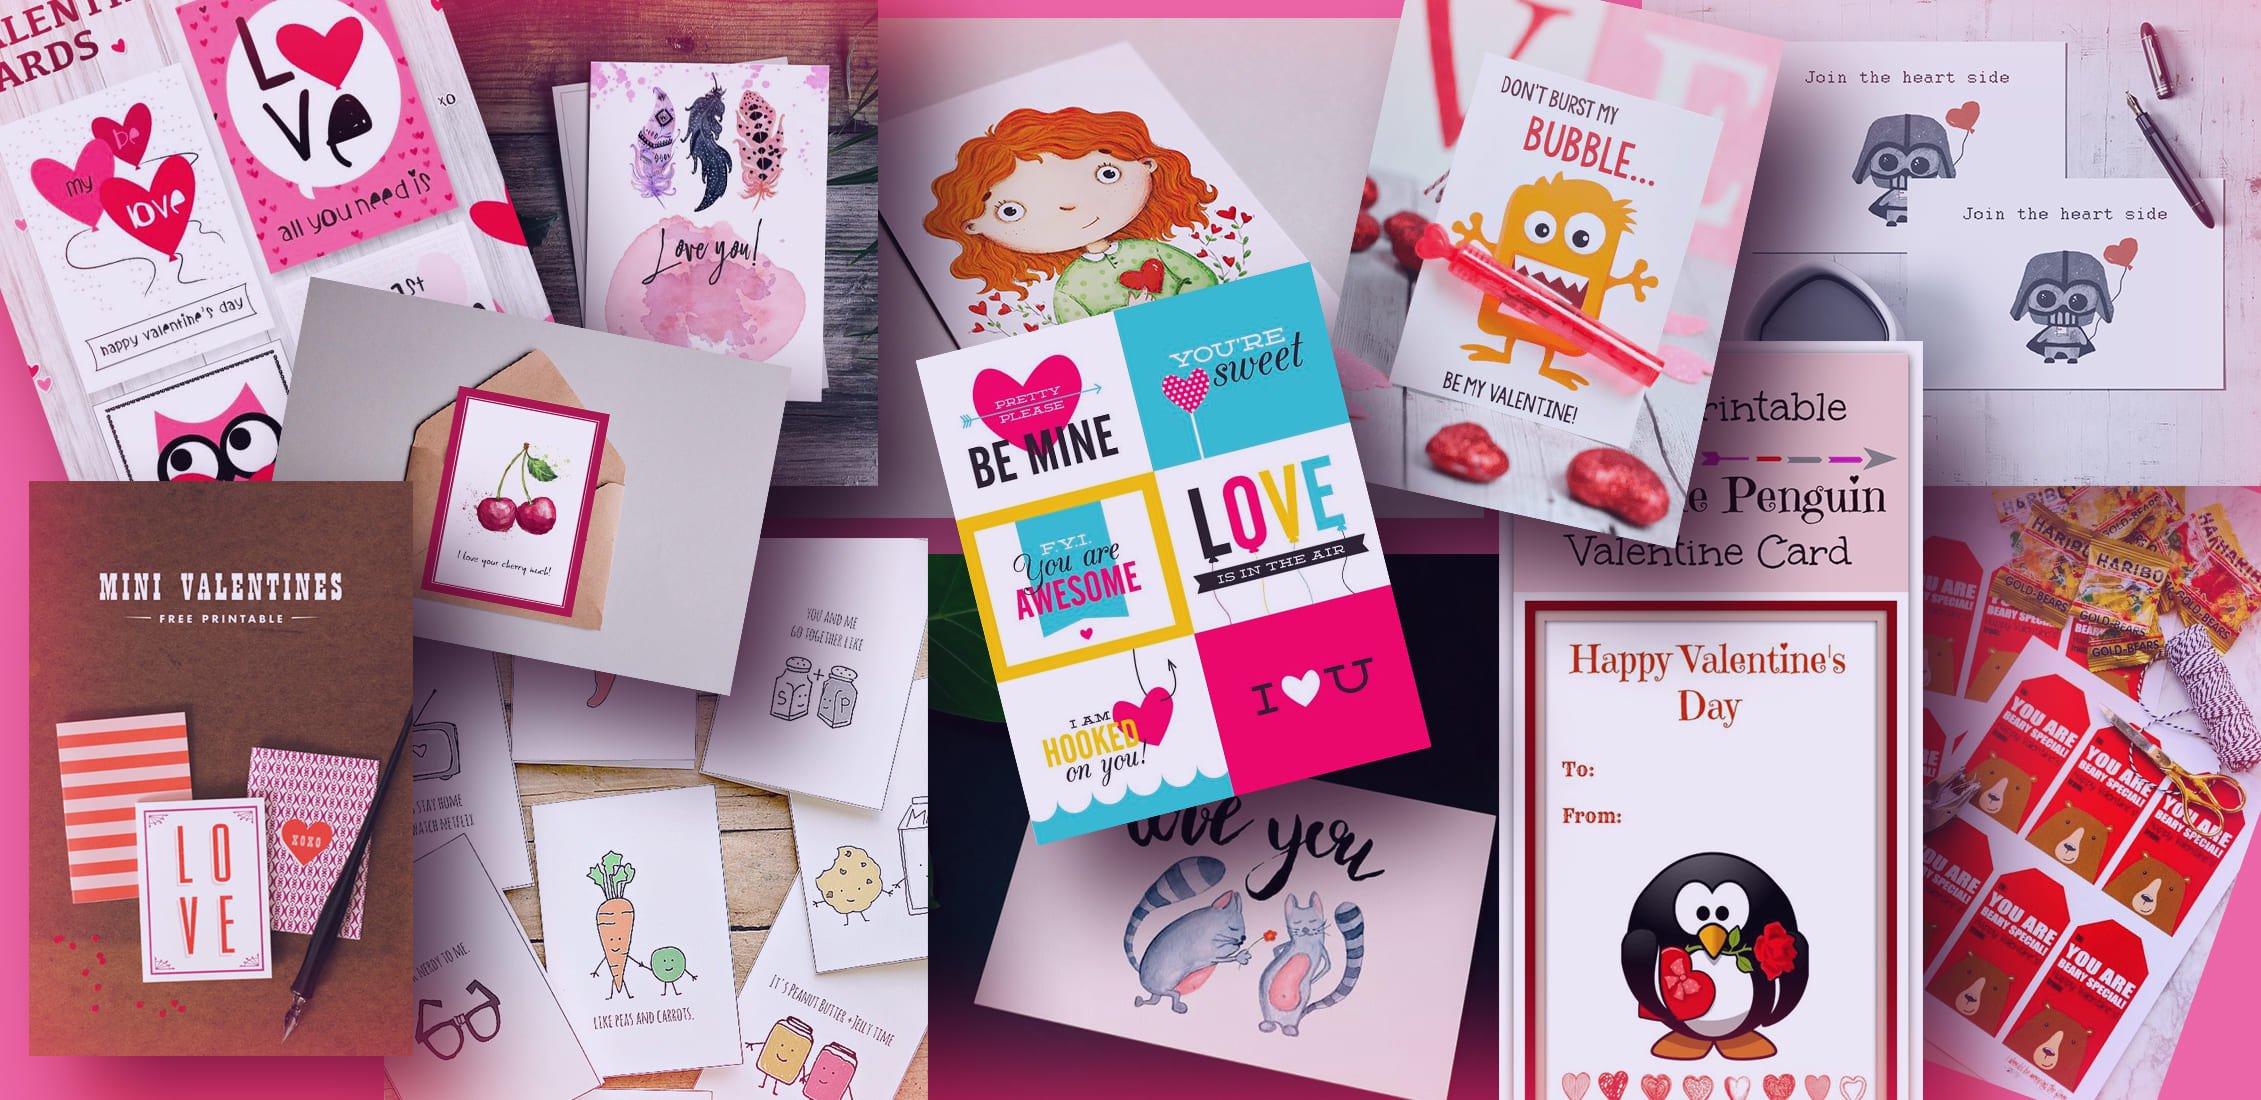 Examples Valentines Day Cards.